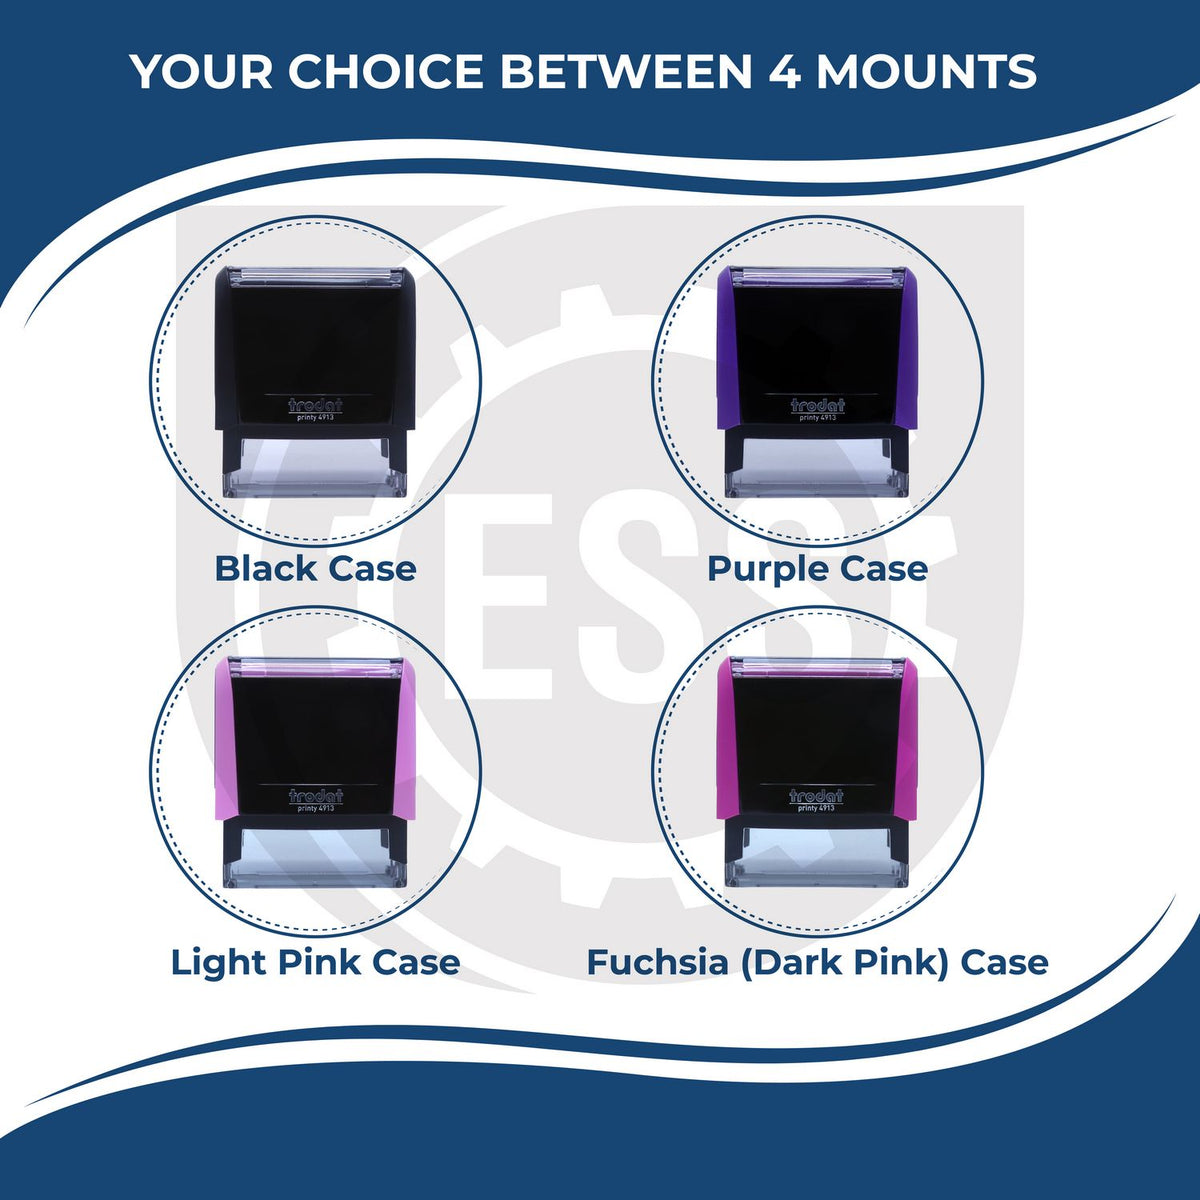 A picture of different colored mounts for the Self-Inking State Seal Utah Notary Stamp featurning a Red, Blue or Black Mount